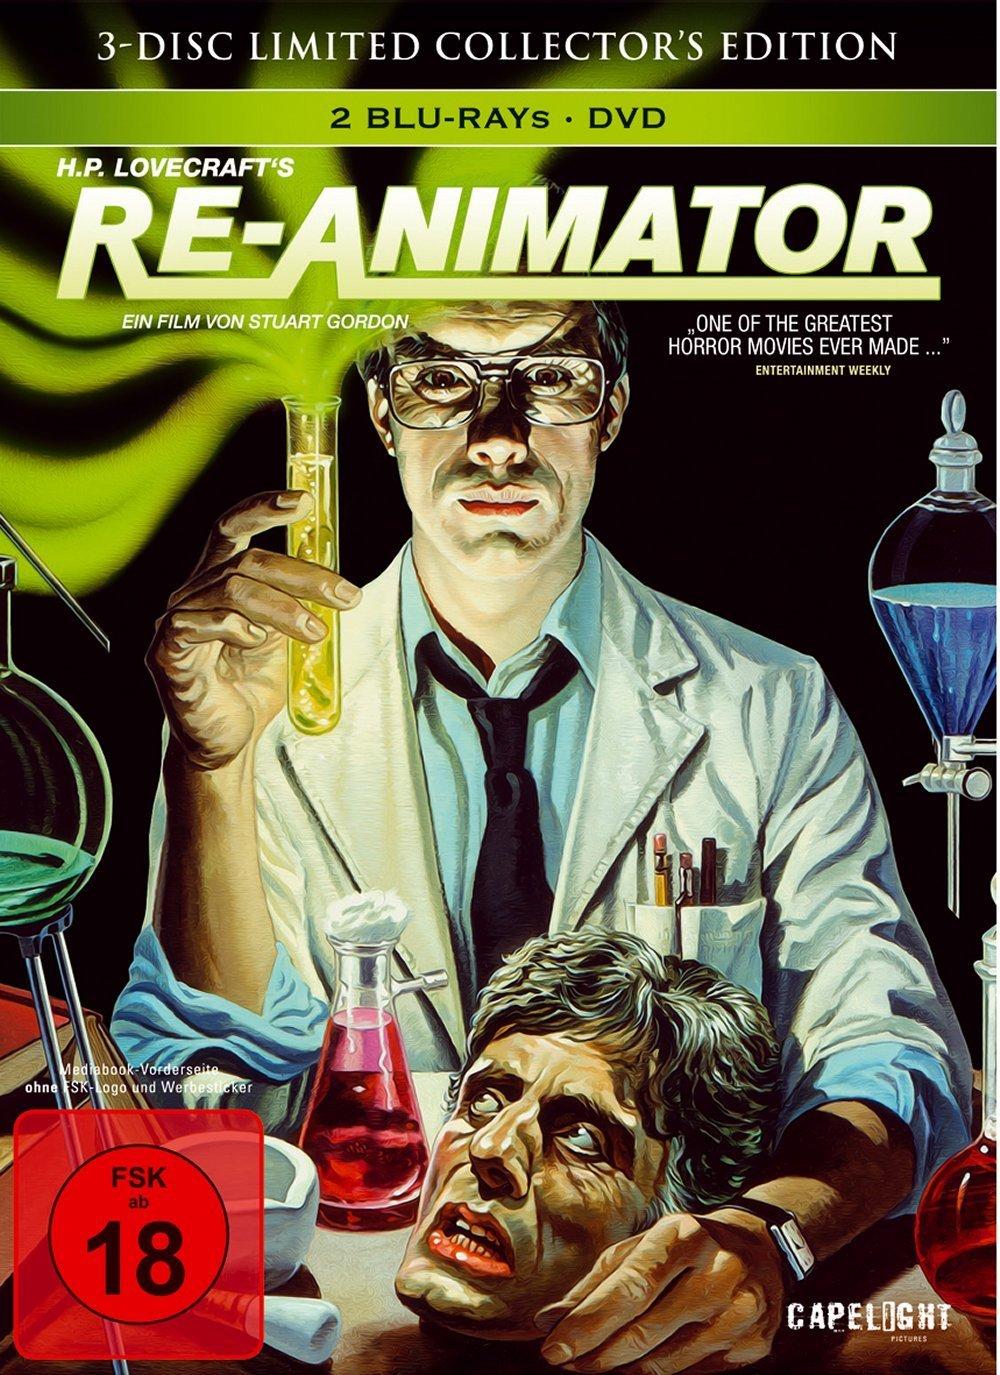 Re-Animator-3-Disc-Limited-Collectors-Edition-Blu-ray-DVD-Cover.jpg